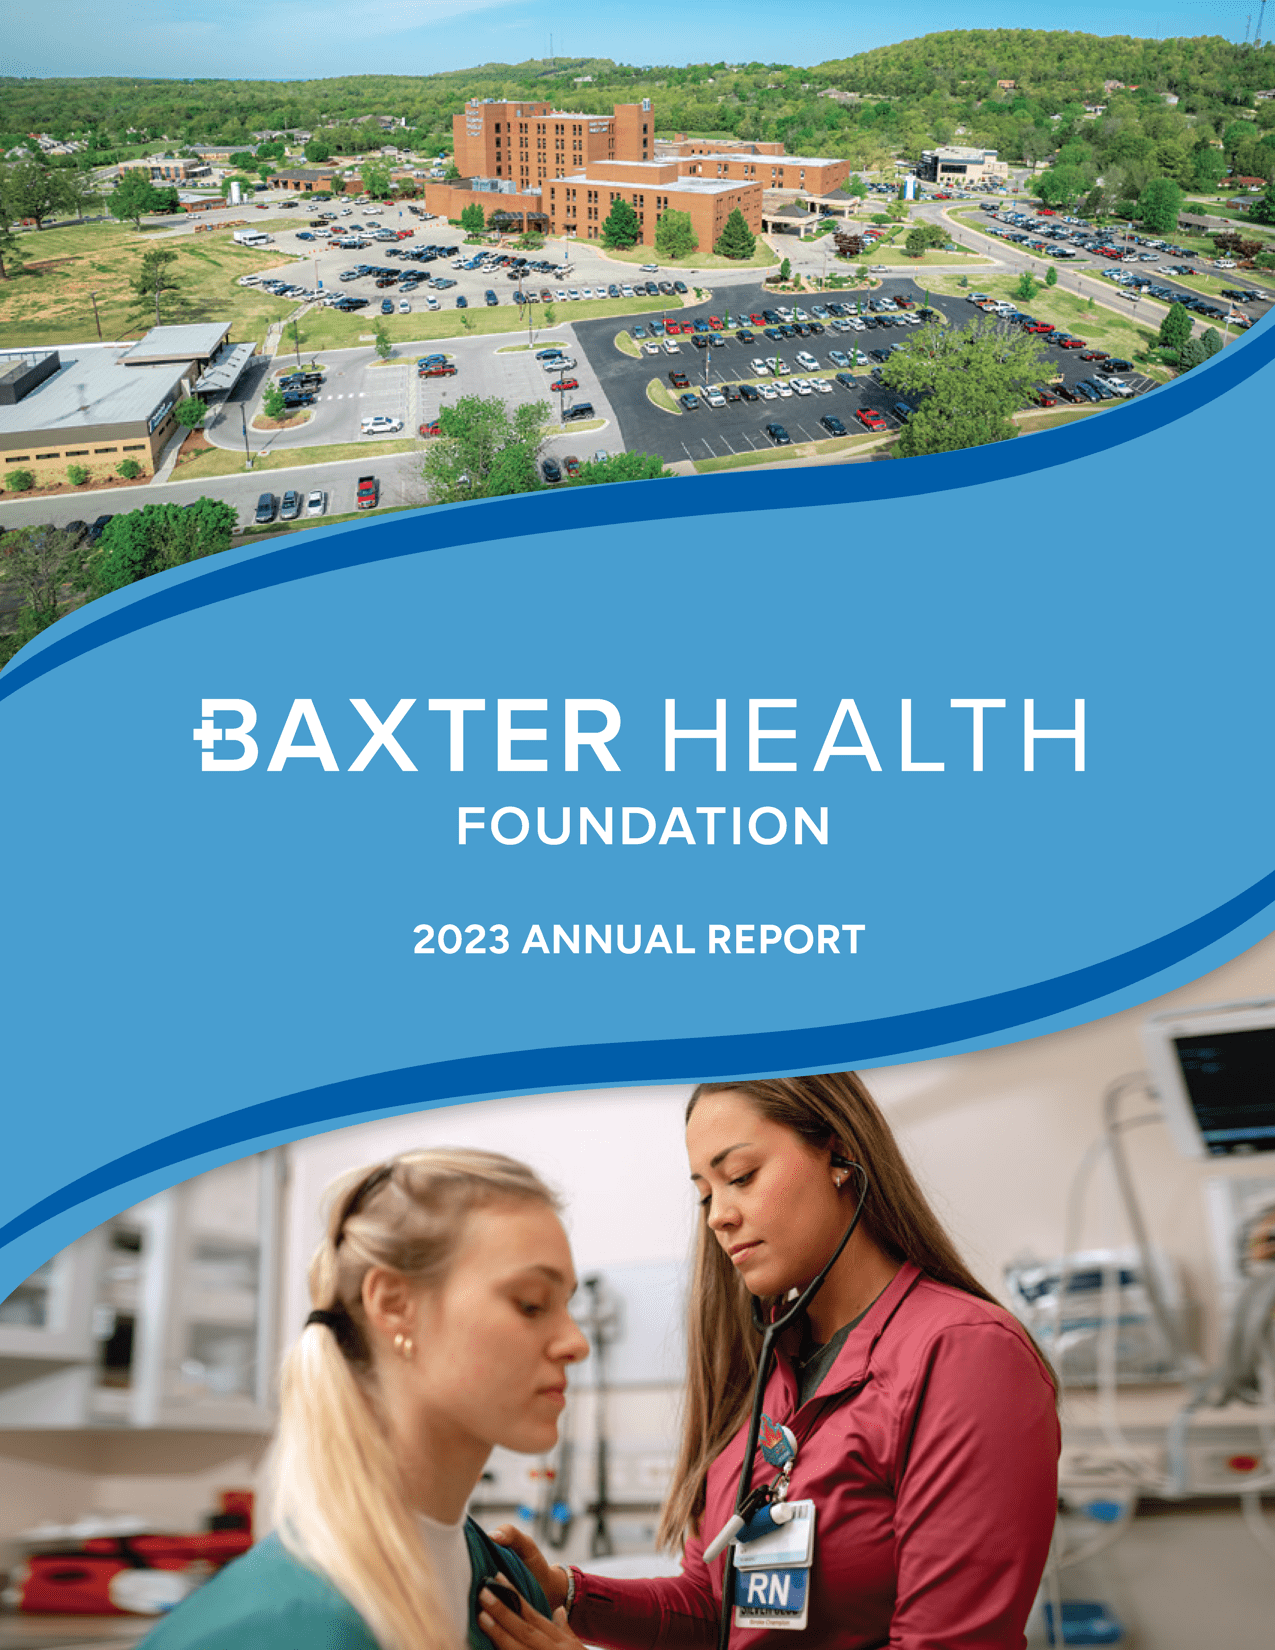 Baxter Health Foundation 2023 Annual Report